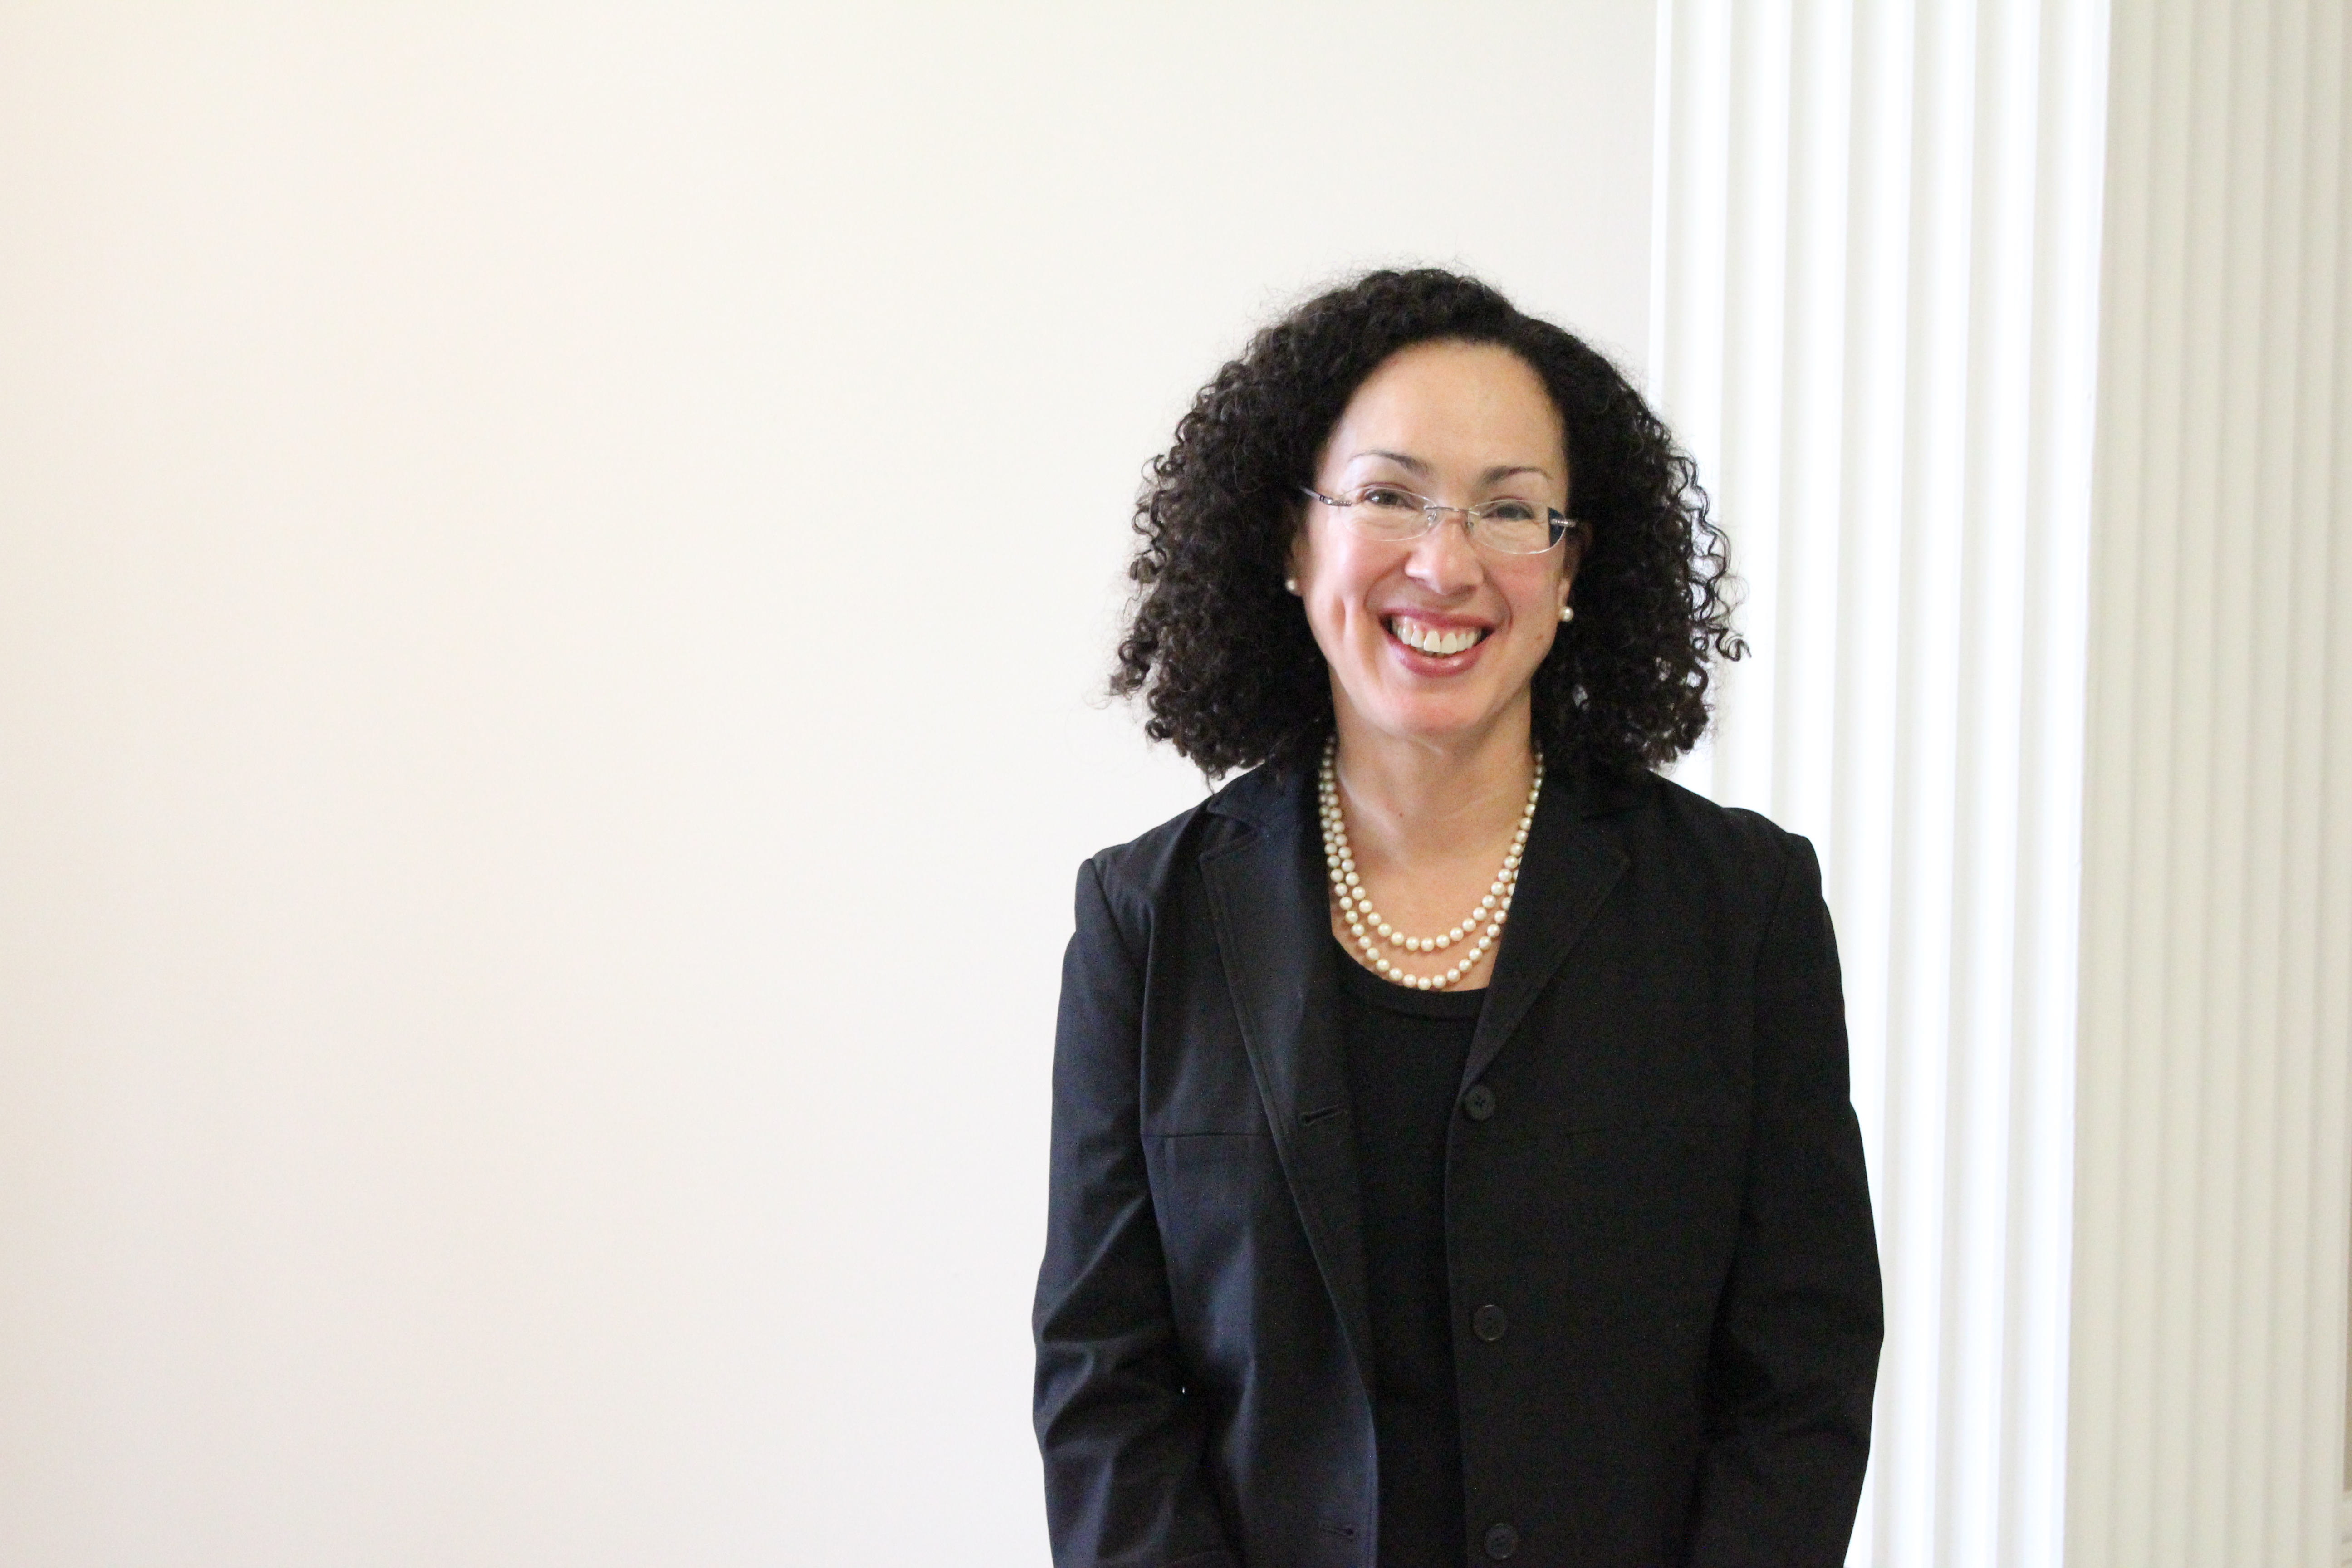 In new leadership role, Prof. Trucios-Haynes committed to transparency, inclusion